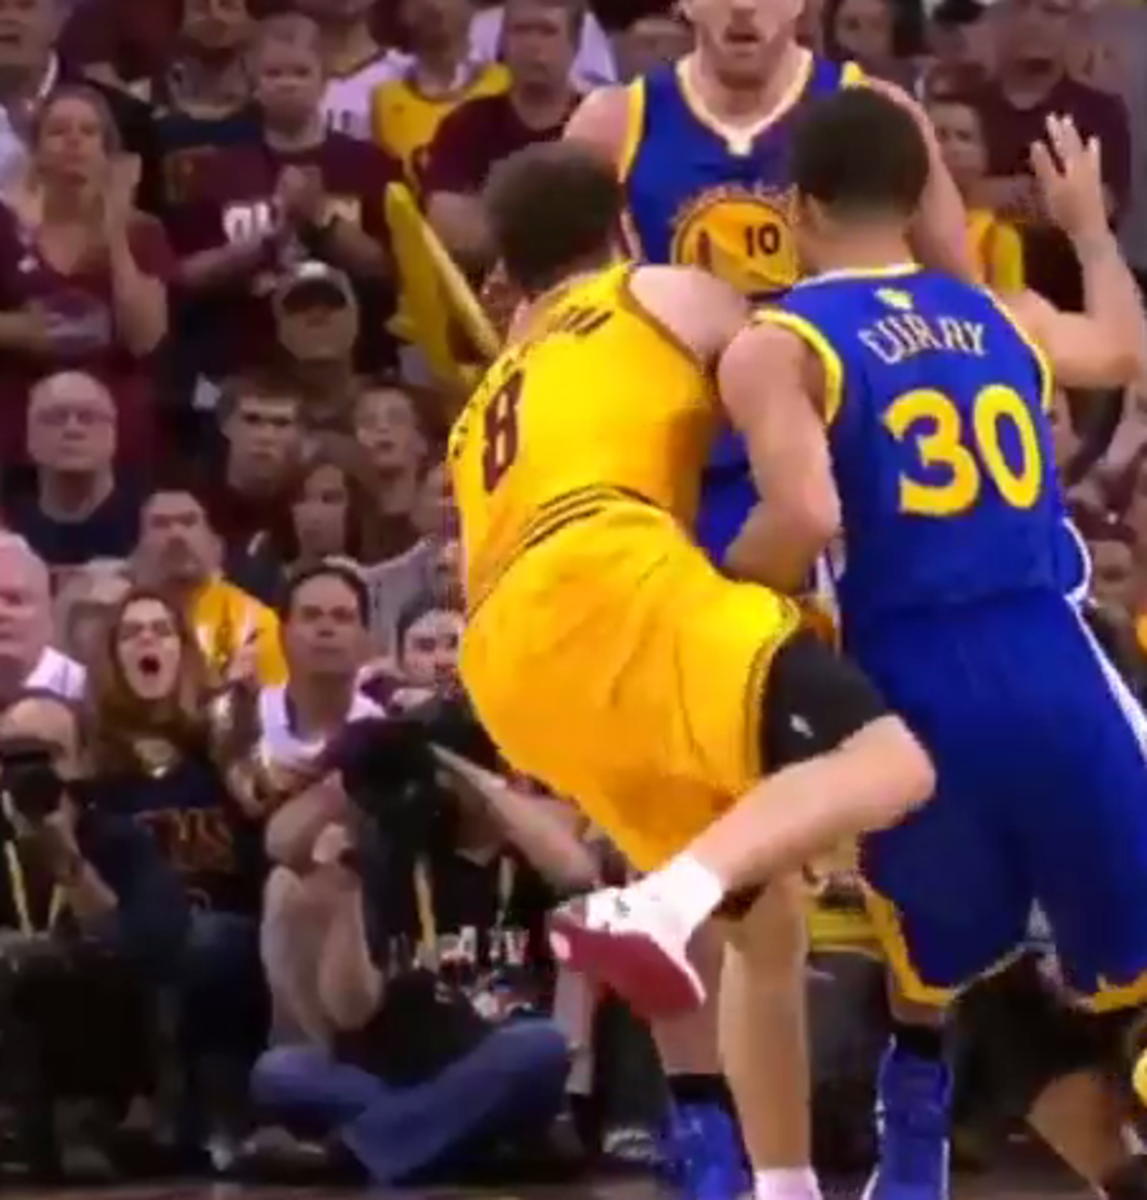 Dellavedova and Curry get tangled in playoff game.